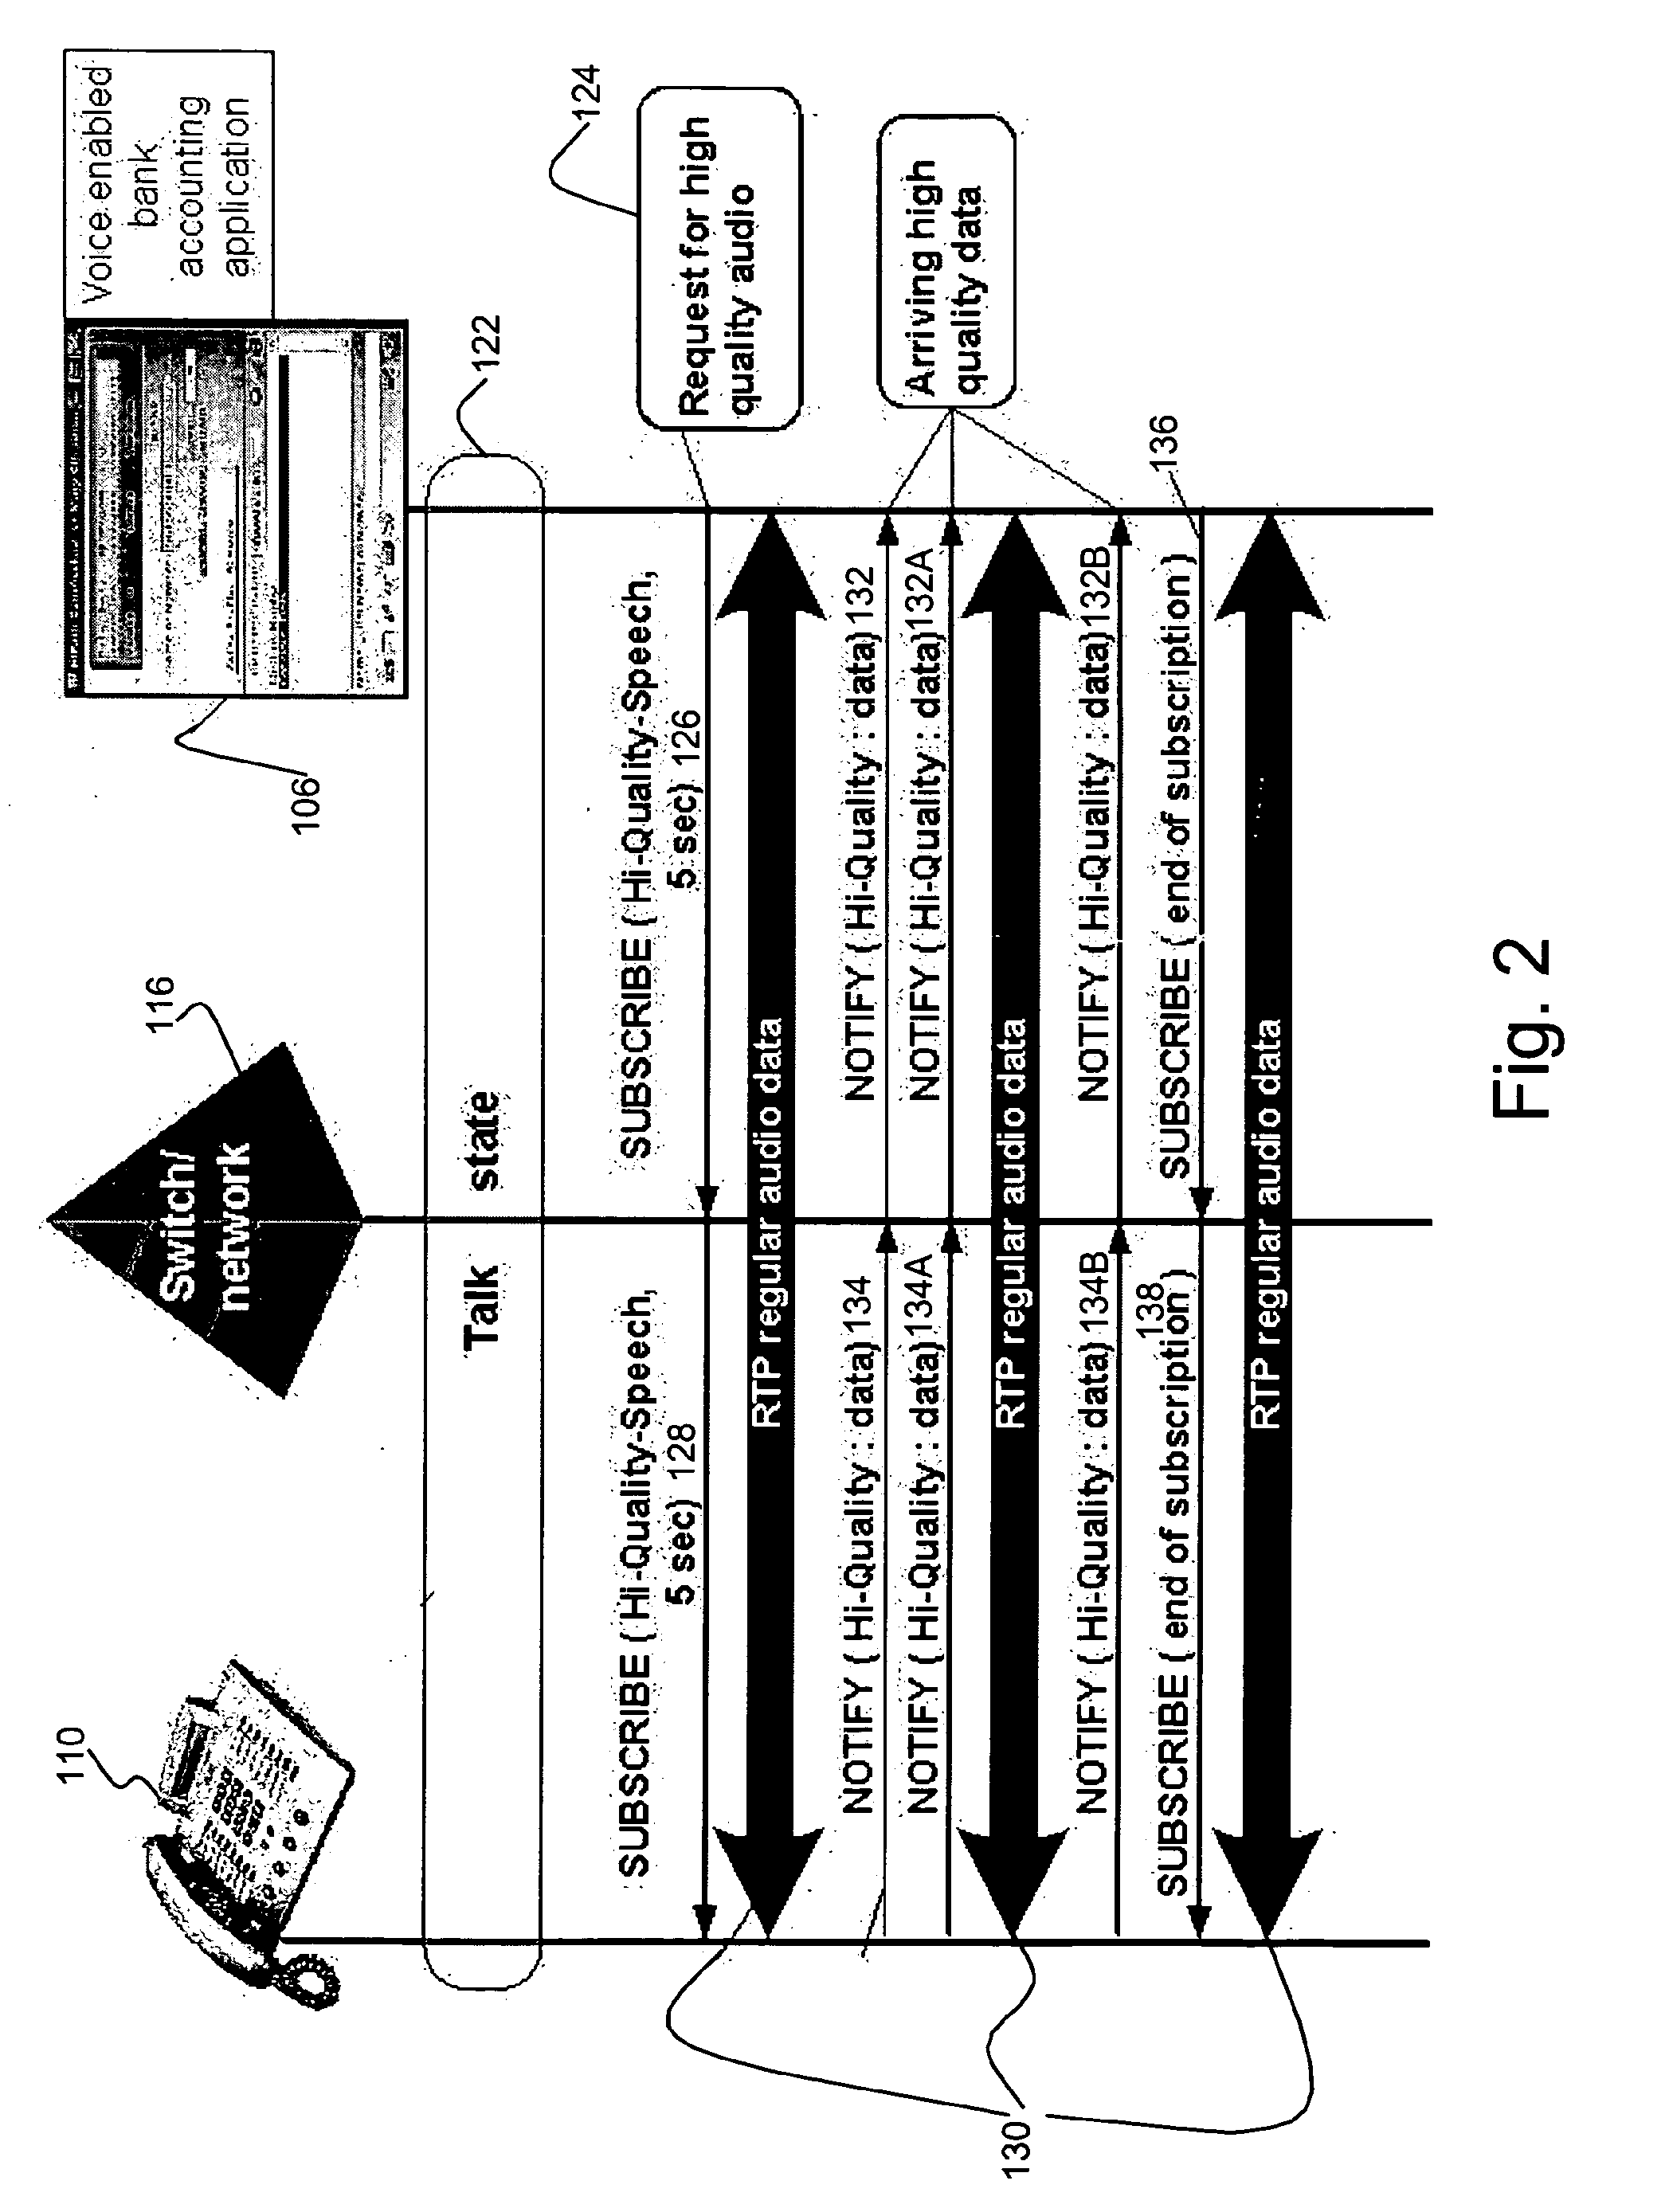 Digital telecommunications system, program product for, and method of managing such a system